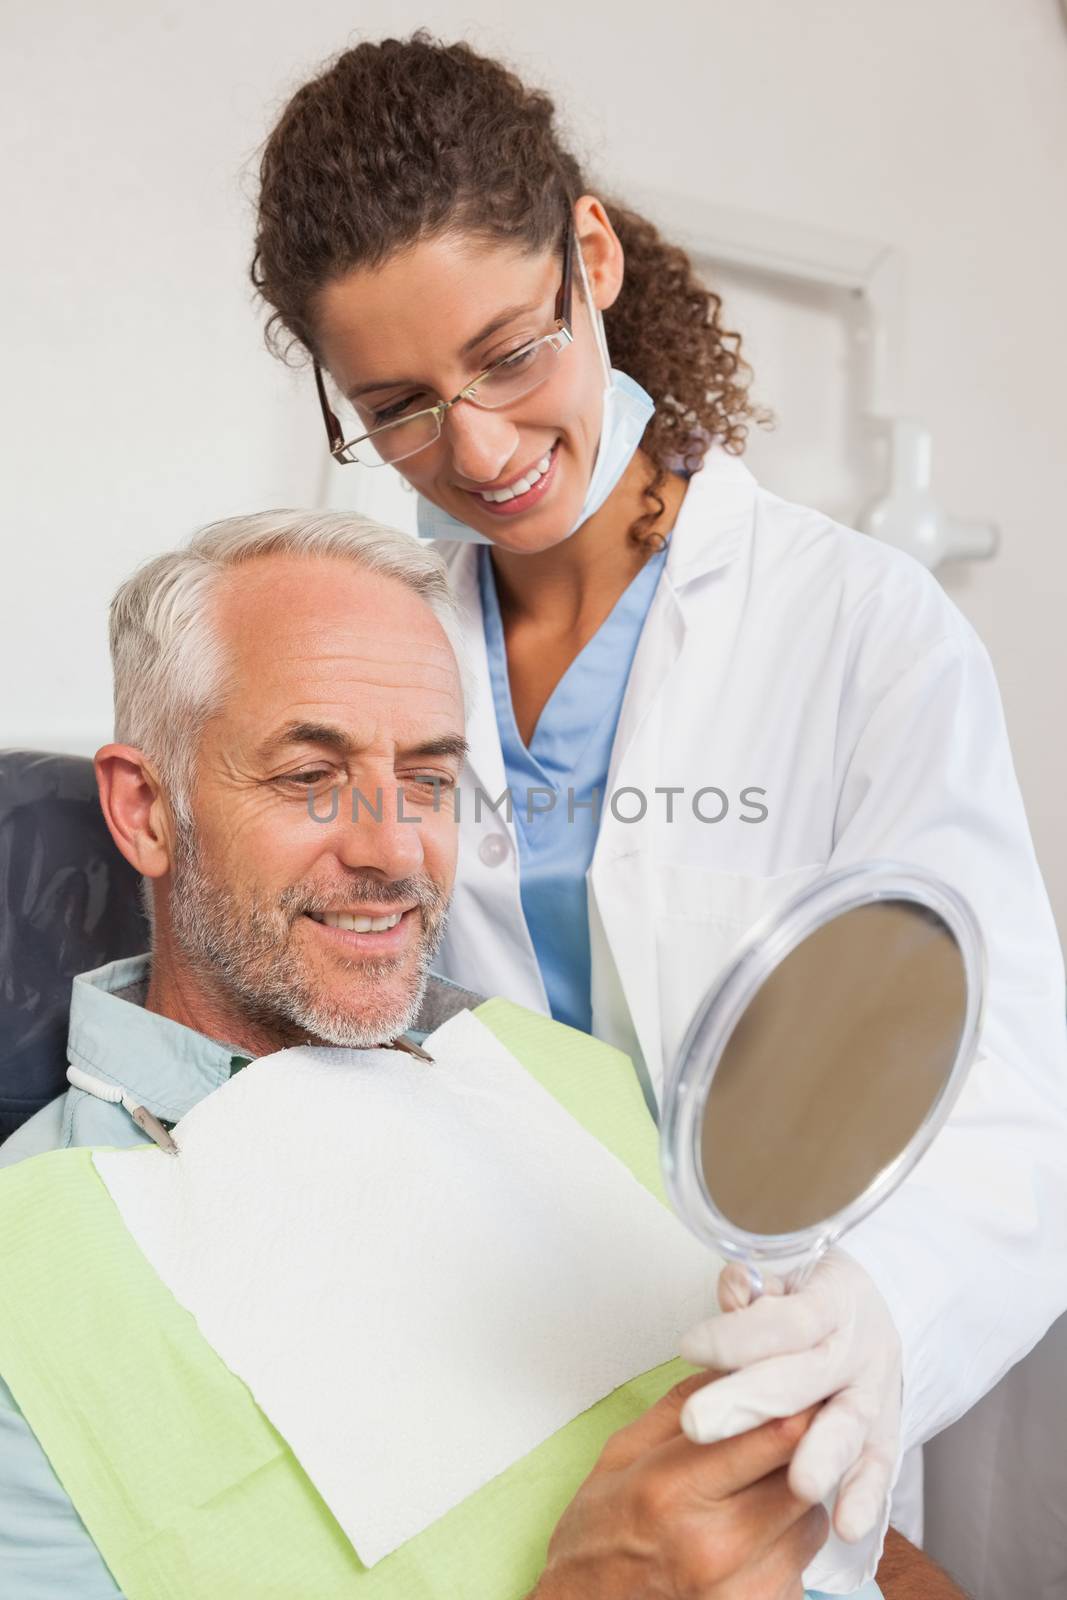 Patient admiring his new smile in the mirror at the dental clinic